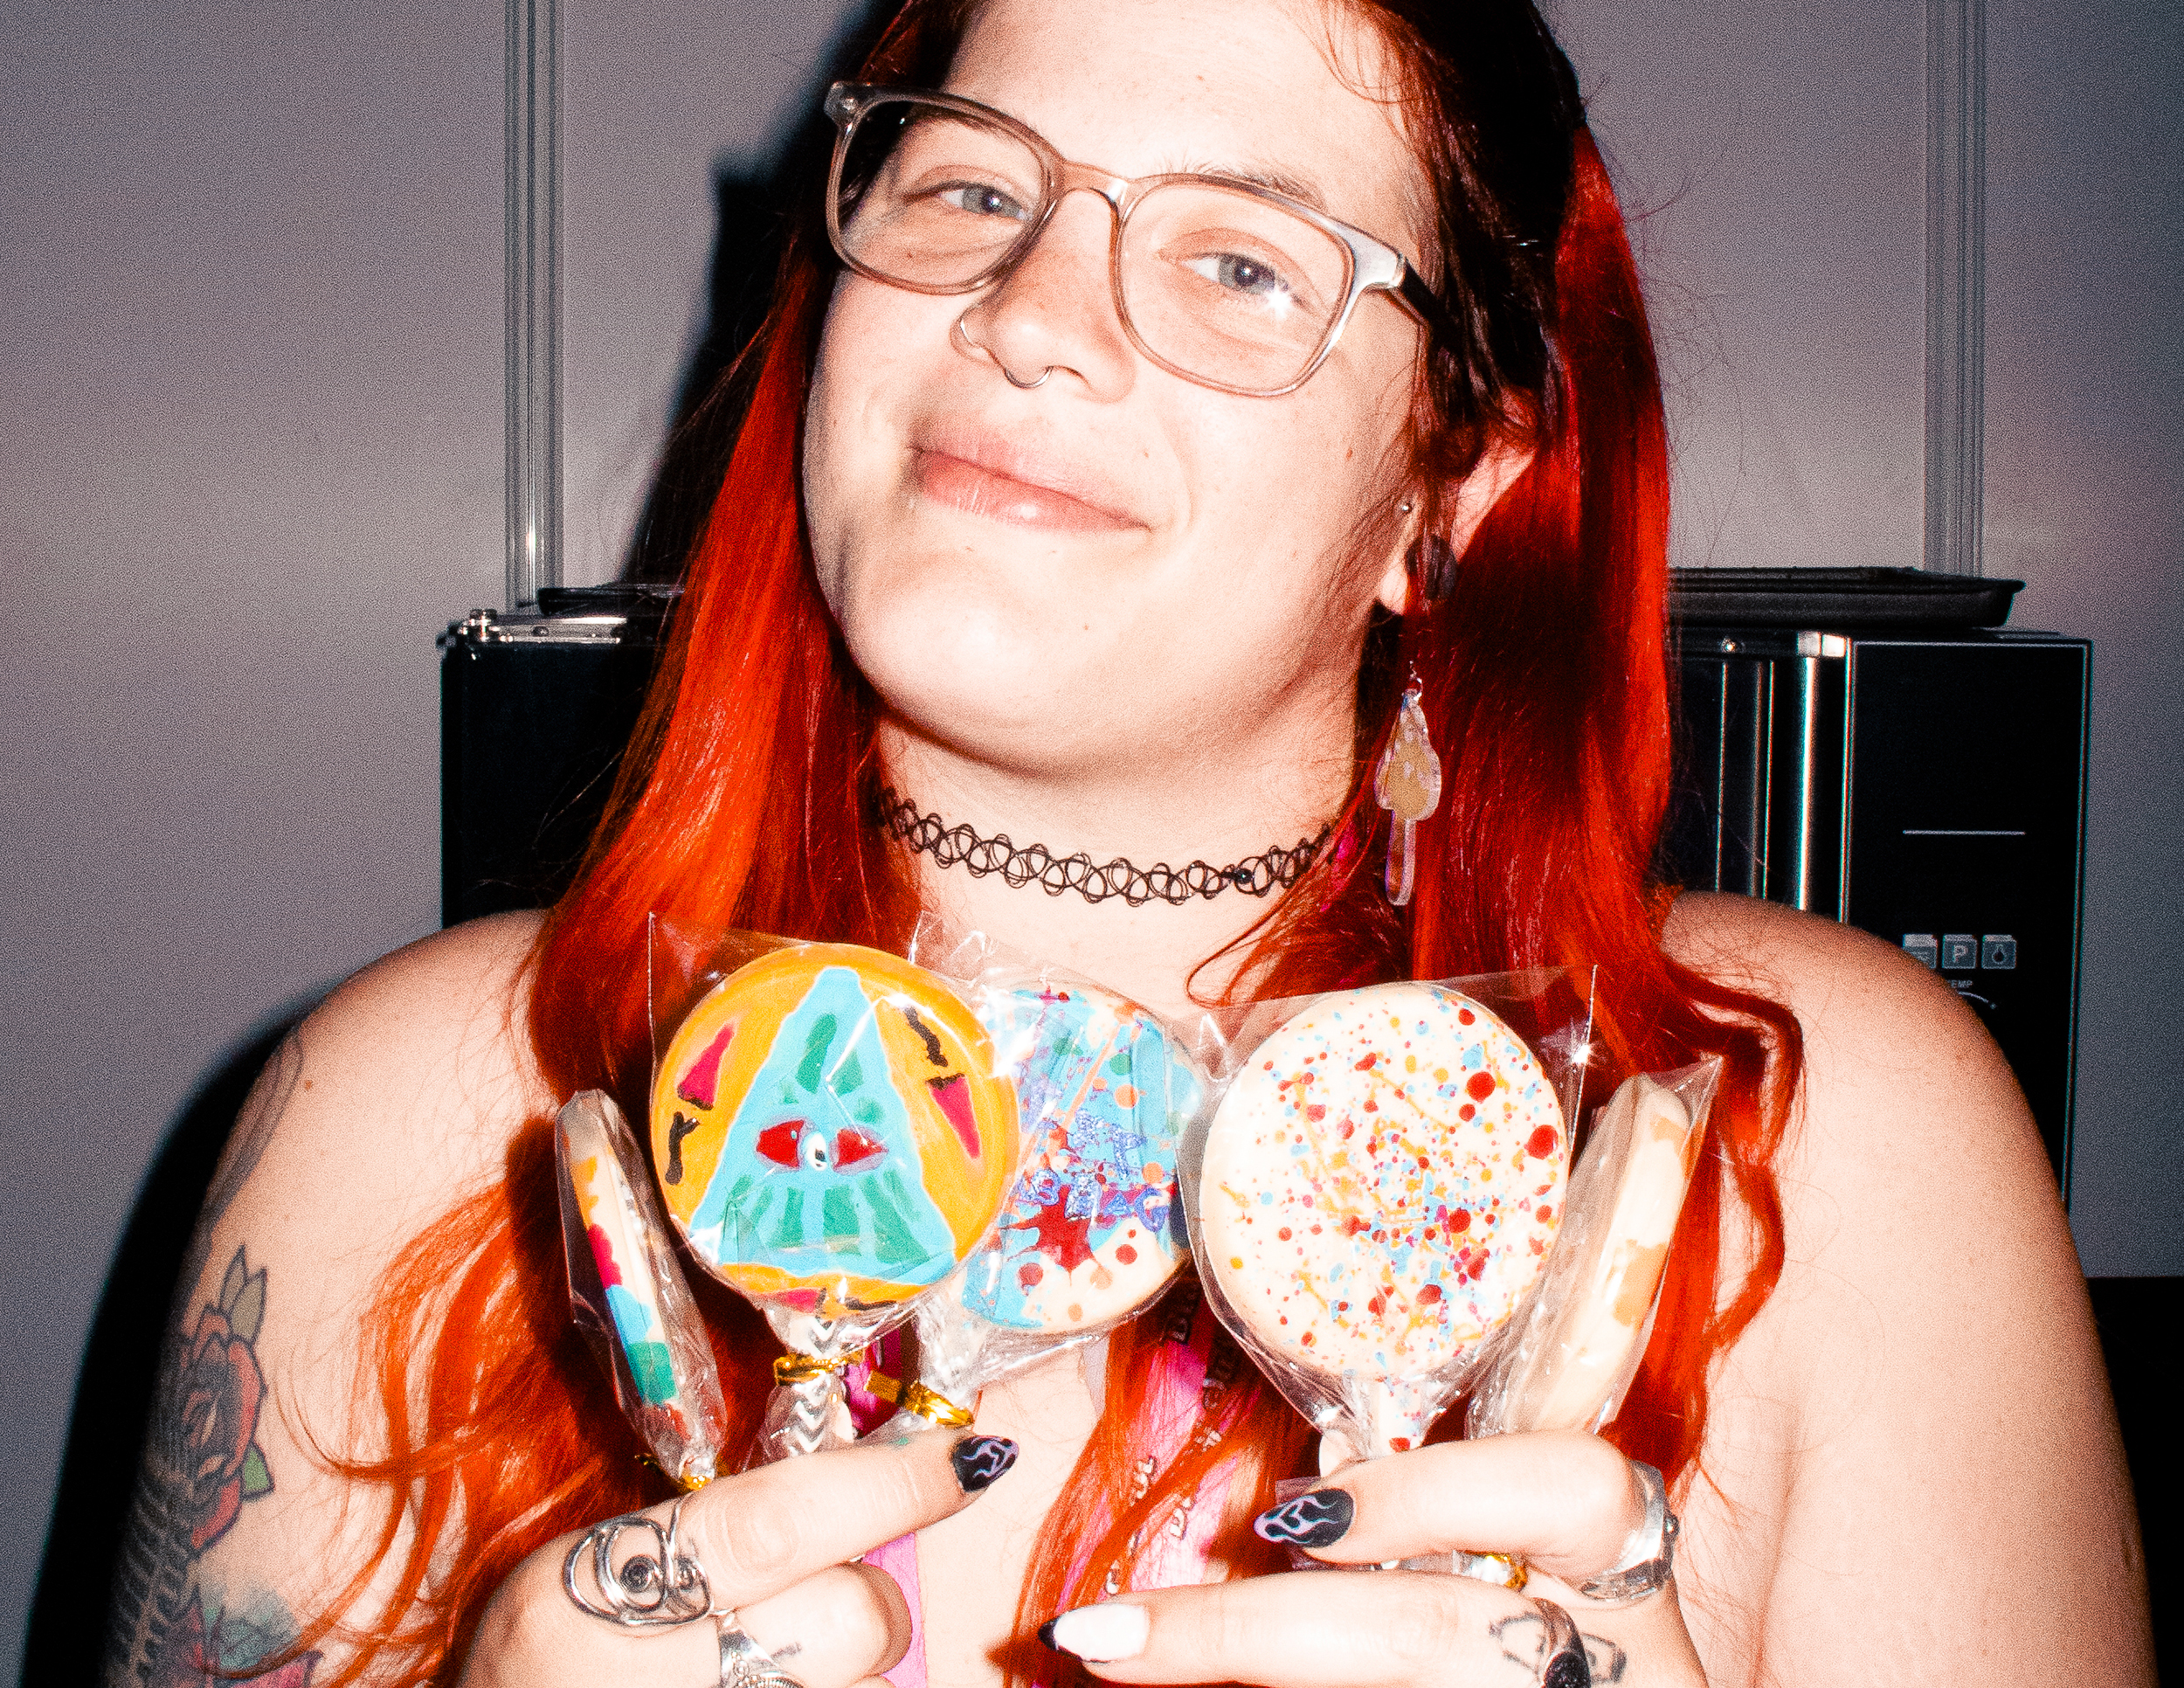 Corey holding her chocolate lollipops at Product Earth UK cannabis event.